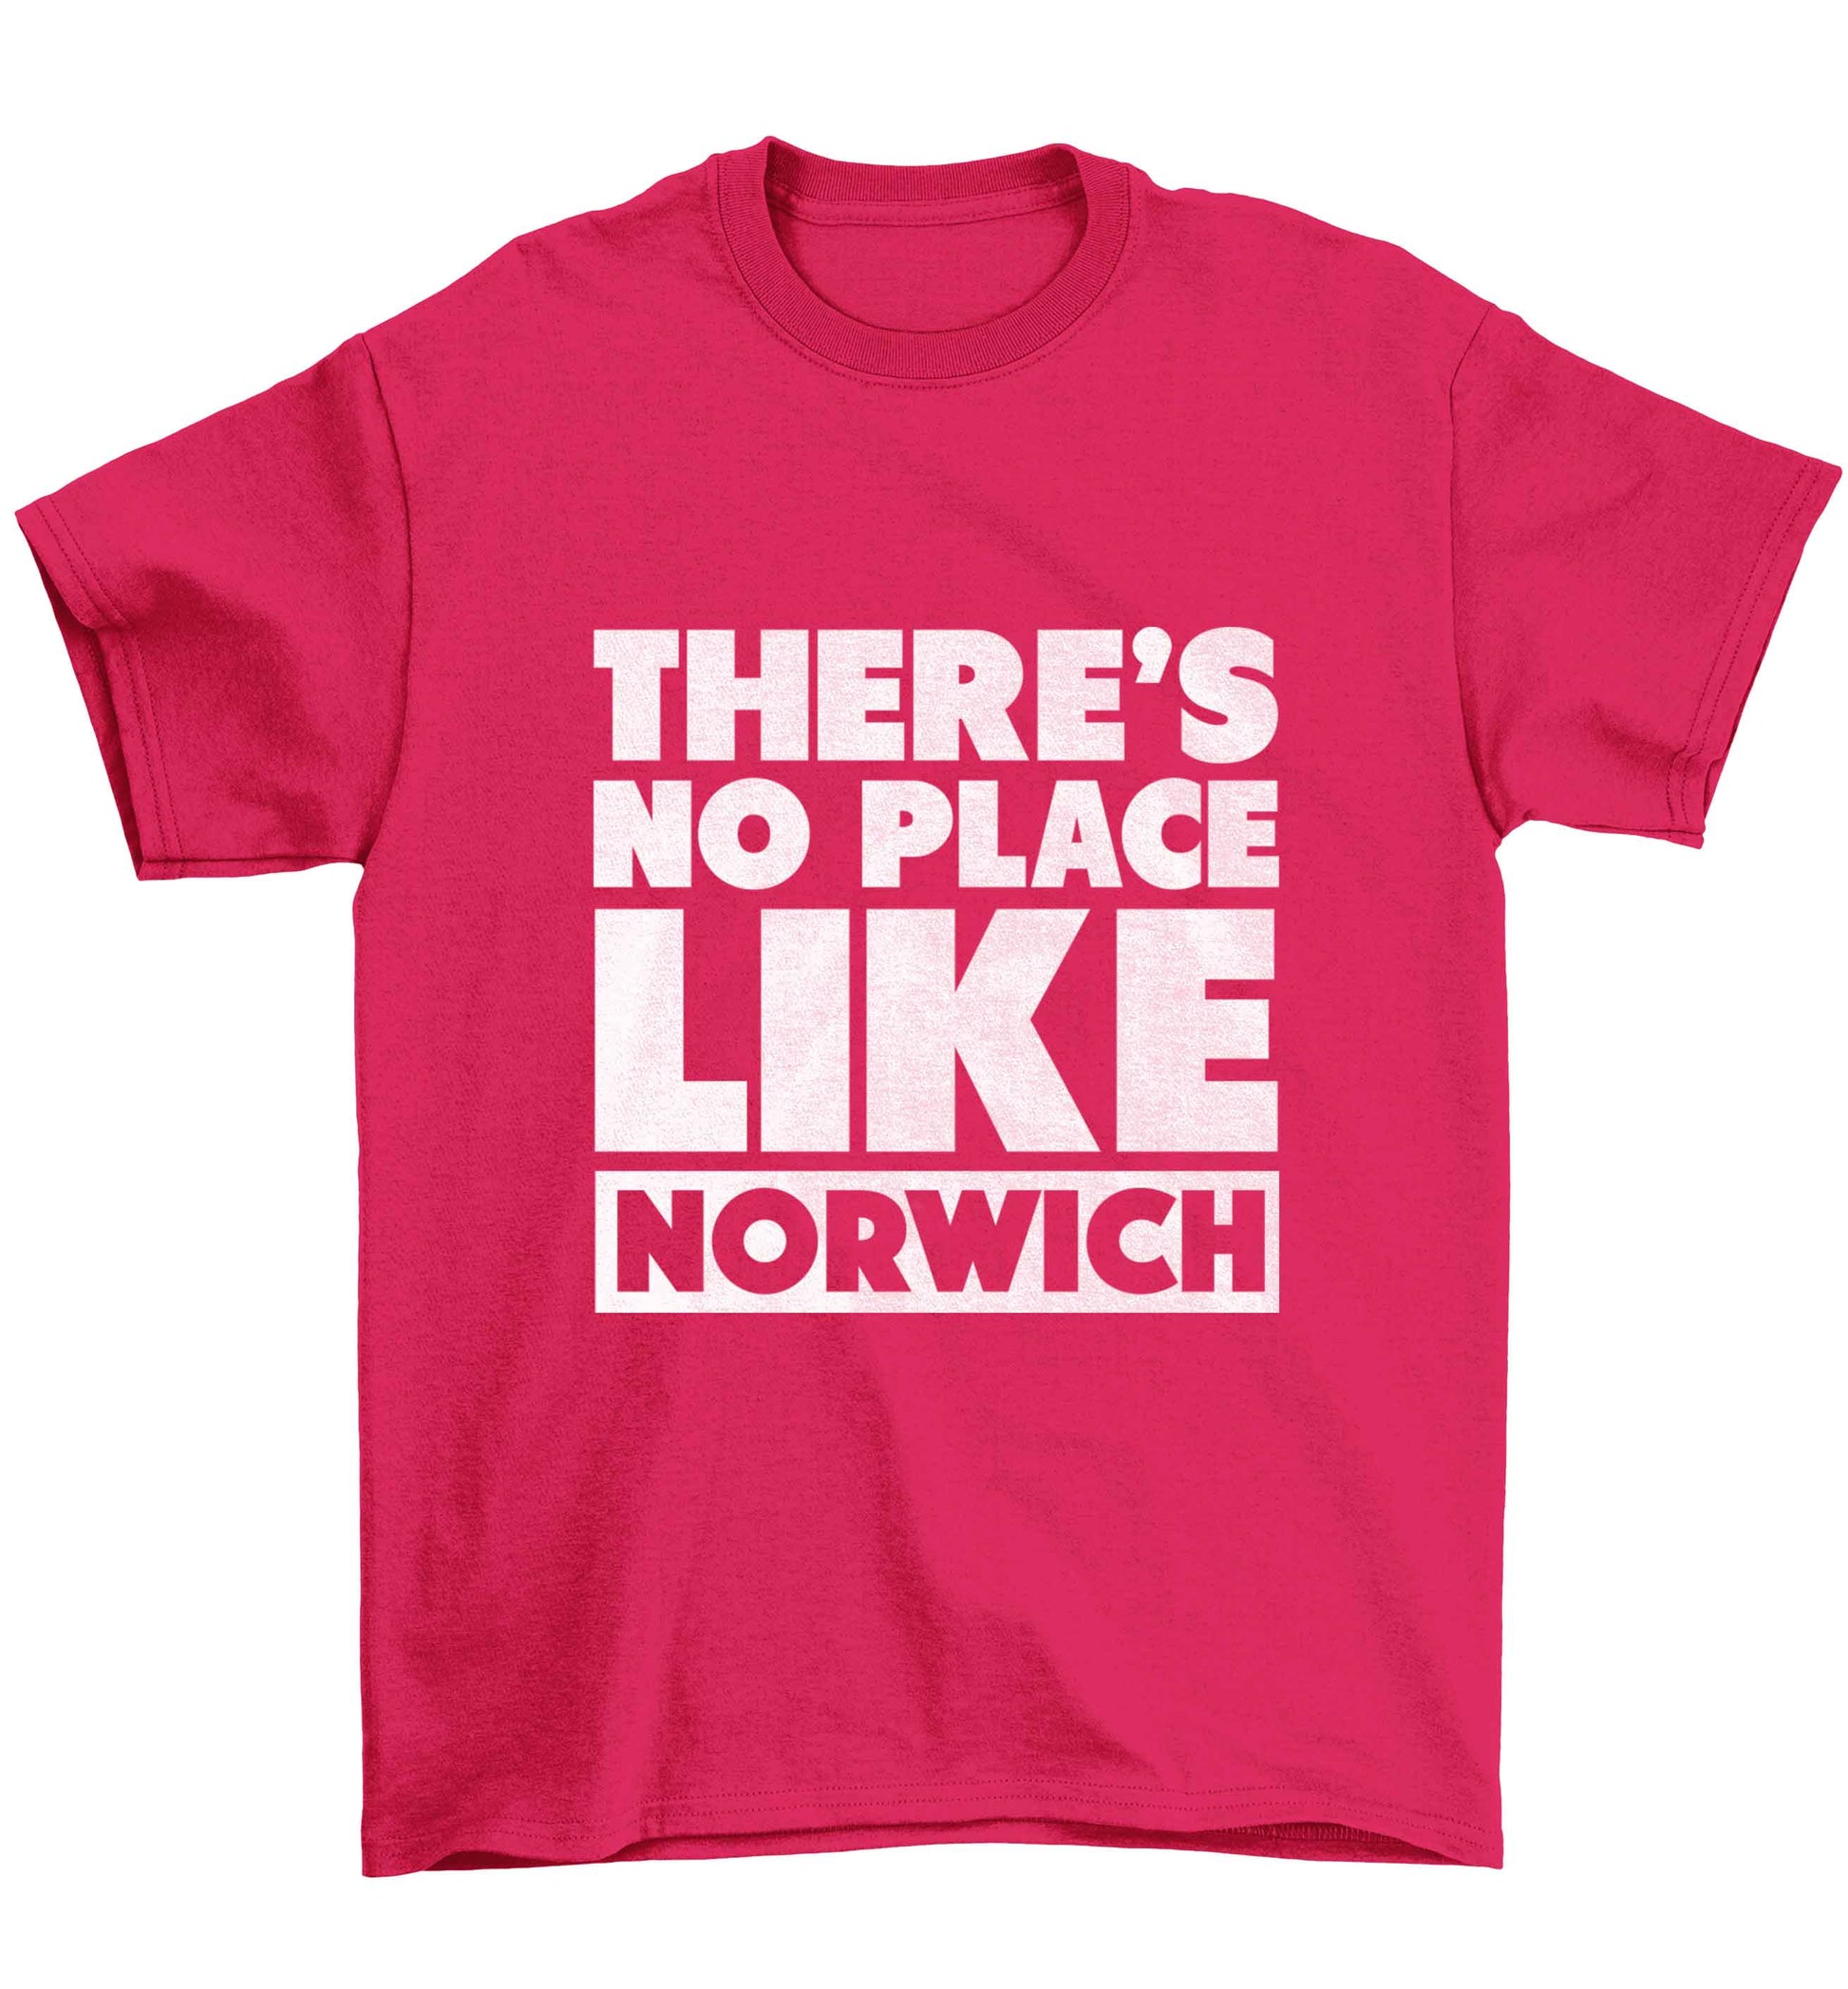 There's no place like Norwich Children's pink Tshirt 12-13 Years